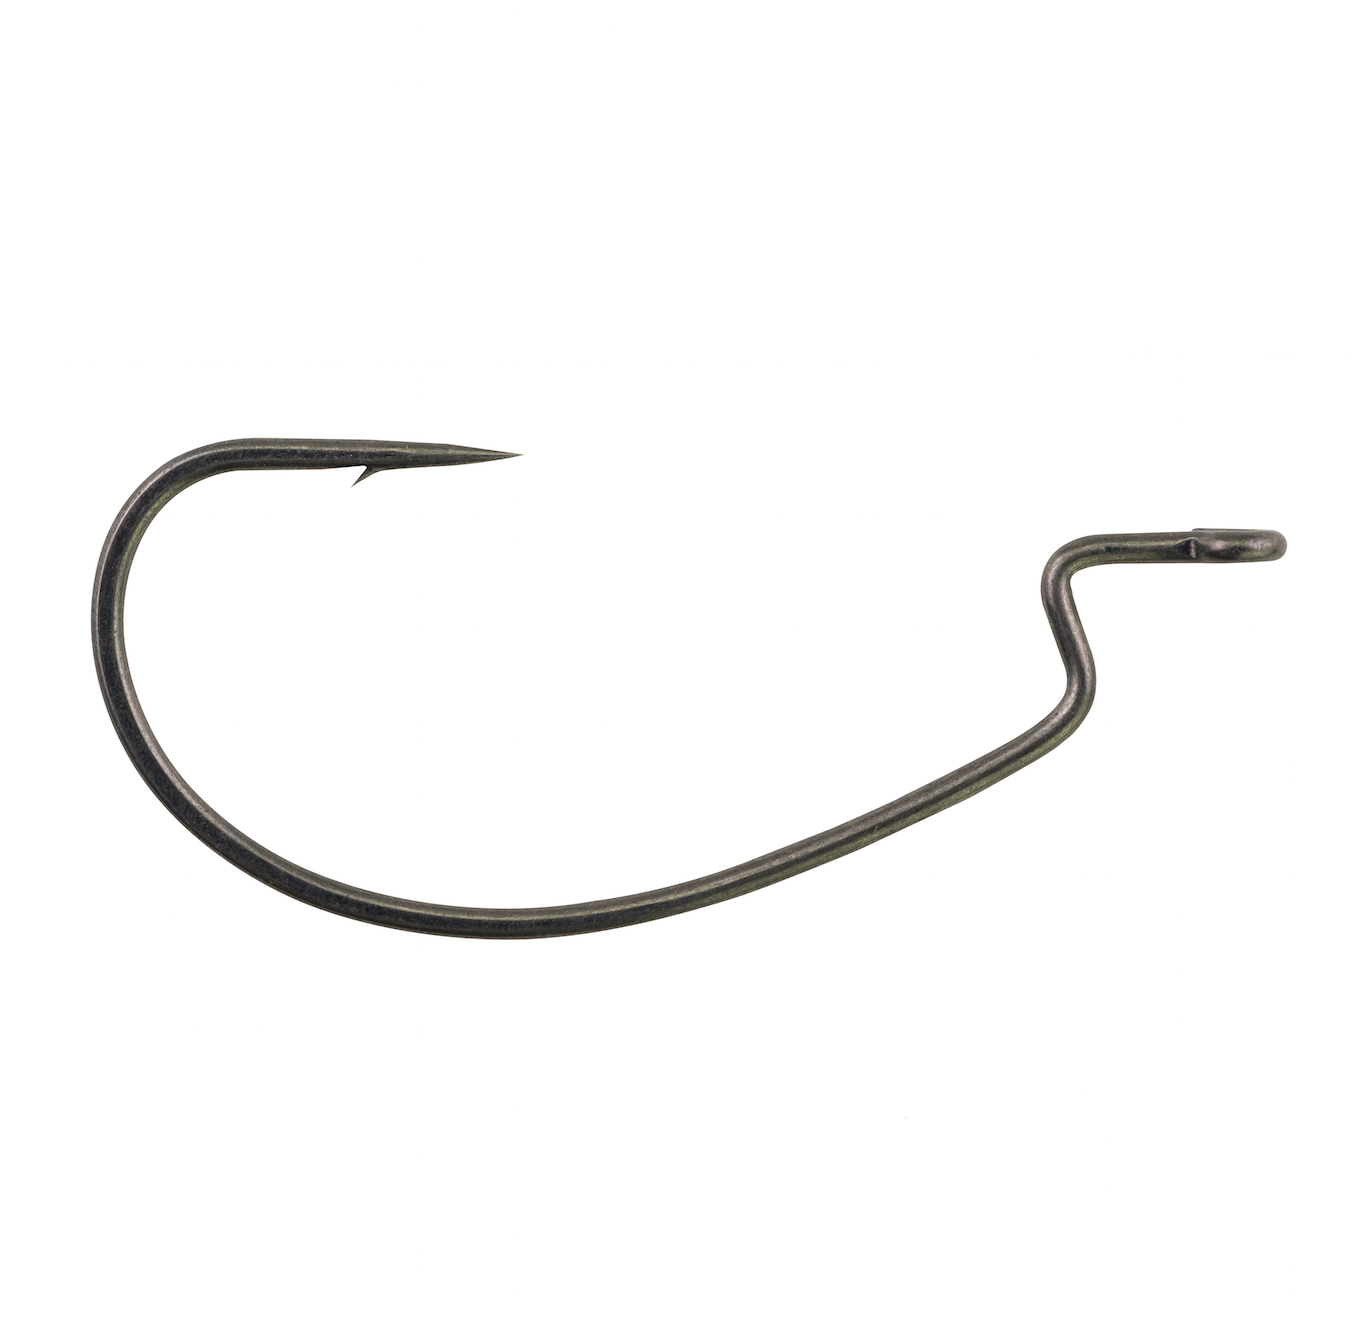 The Superline EWG is a larger diameter hook designed to fish braid in heavy cover. Big creatures and worms work well on this hook when braided line is the norm. Sizes span from 2/0 through 7/0, and come in packages of six for $3.99.